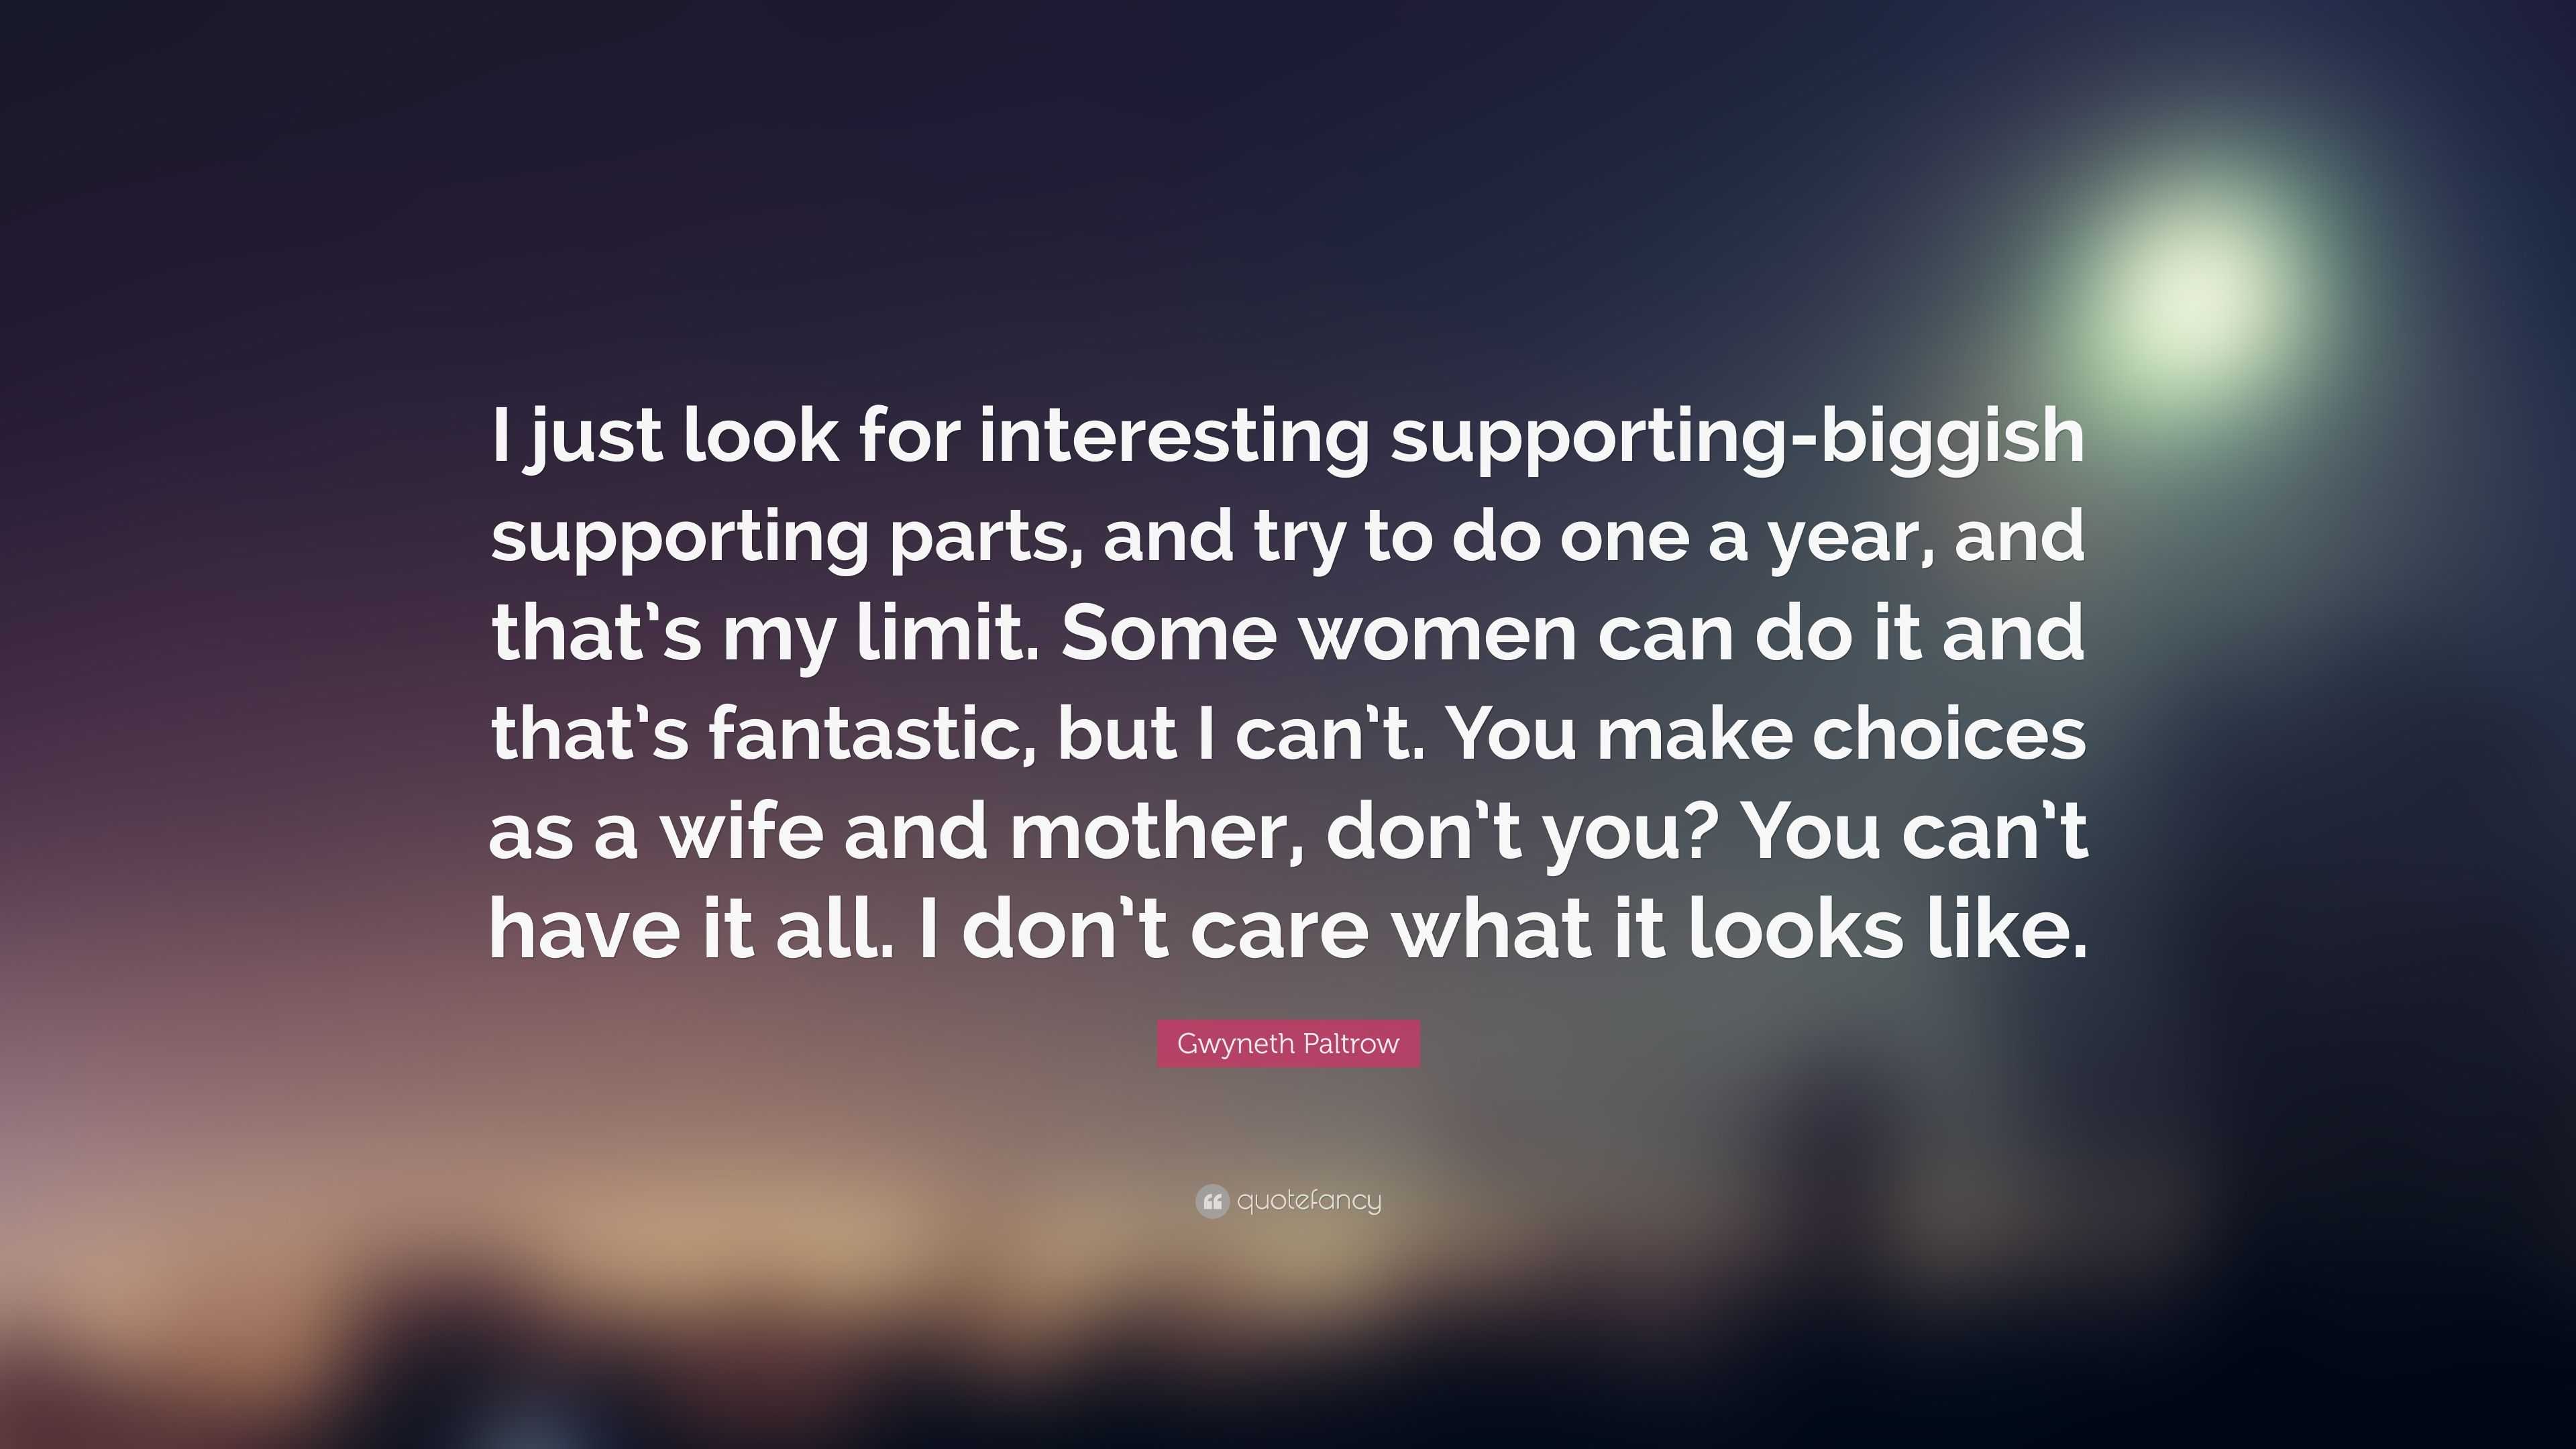 Gwyneth Paltrow Quote: “I just look for interesting supporting